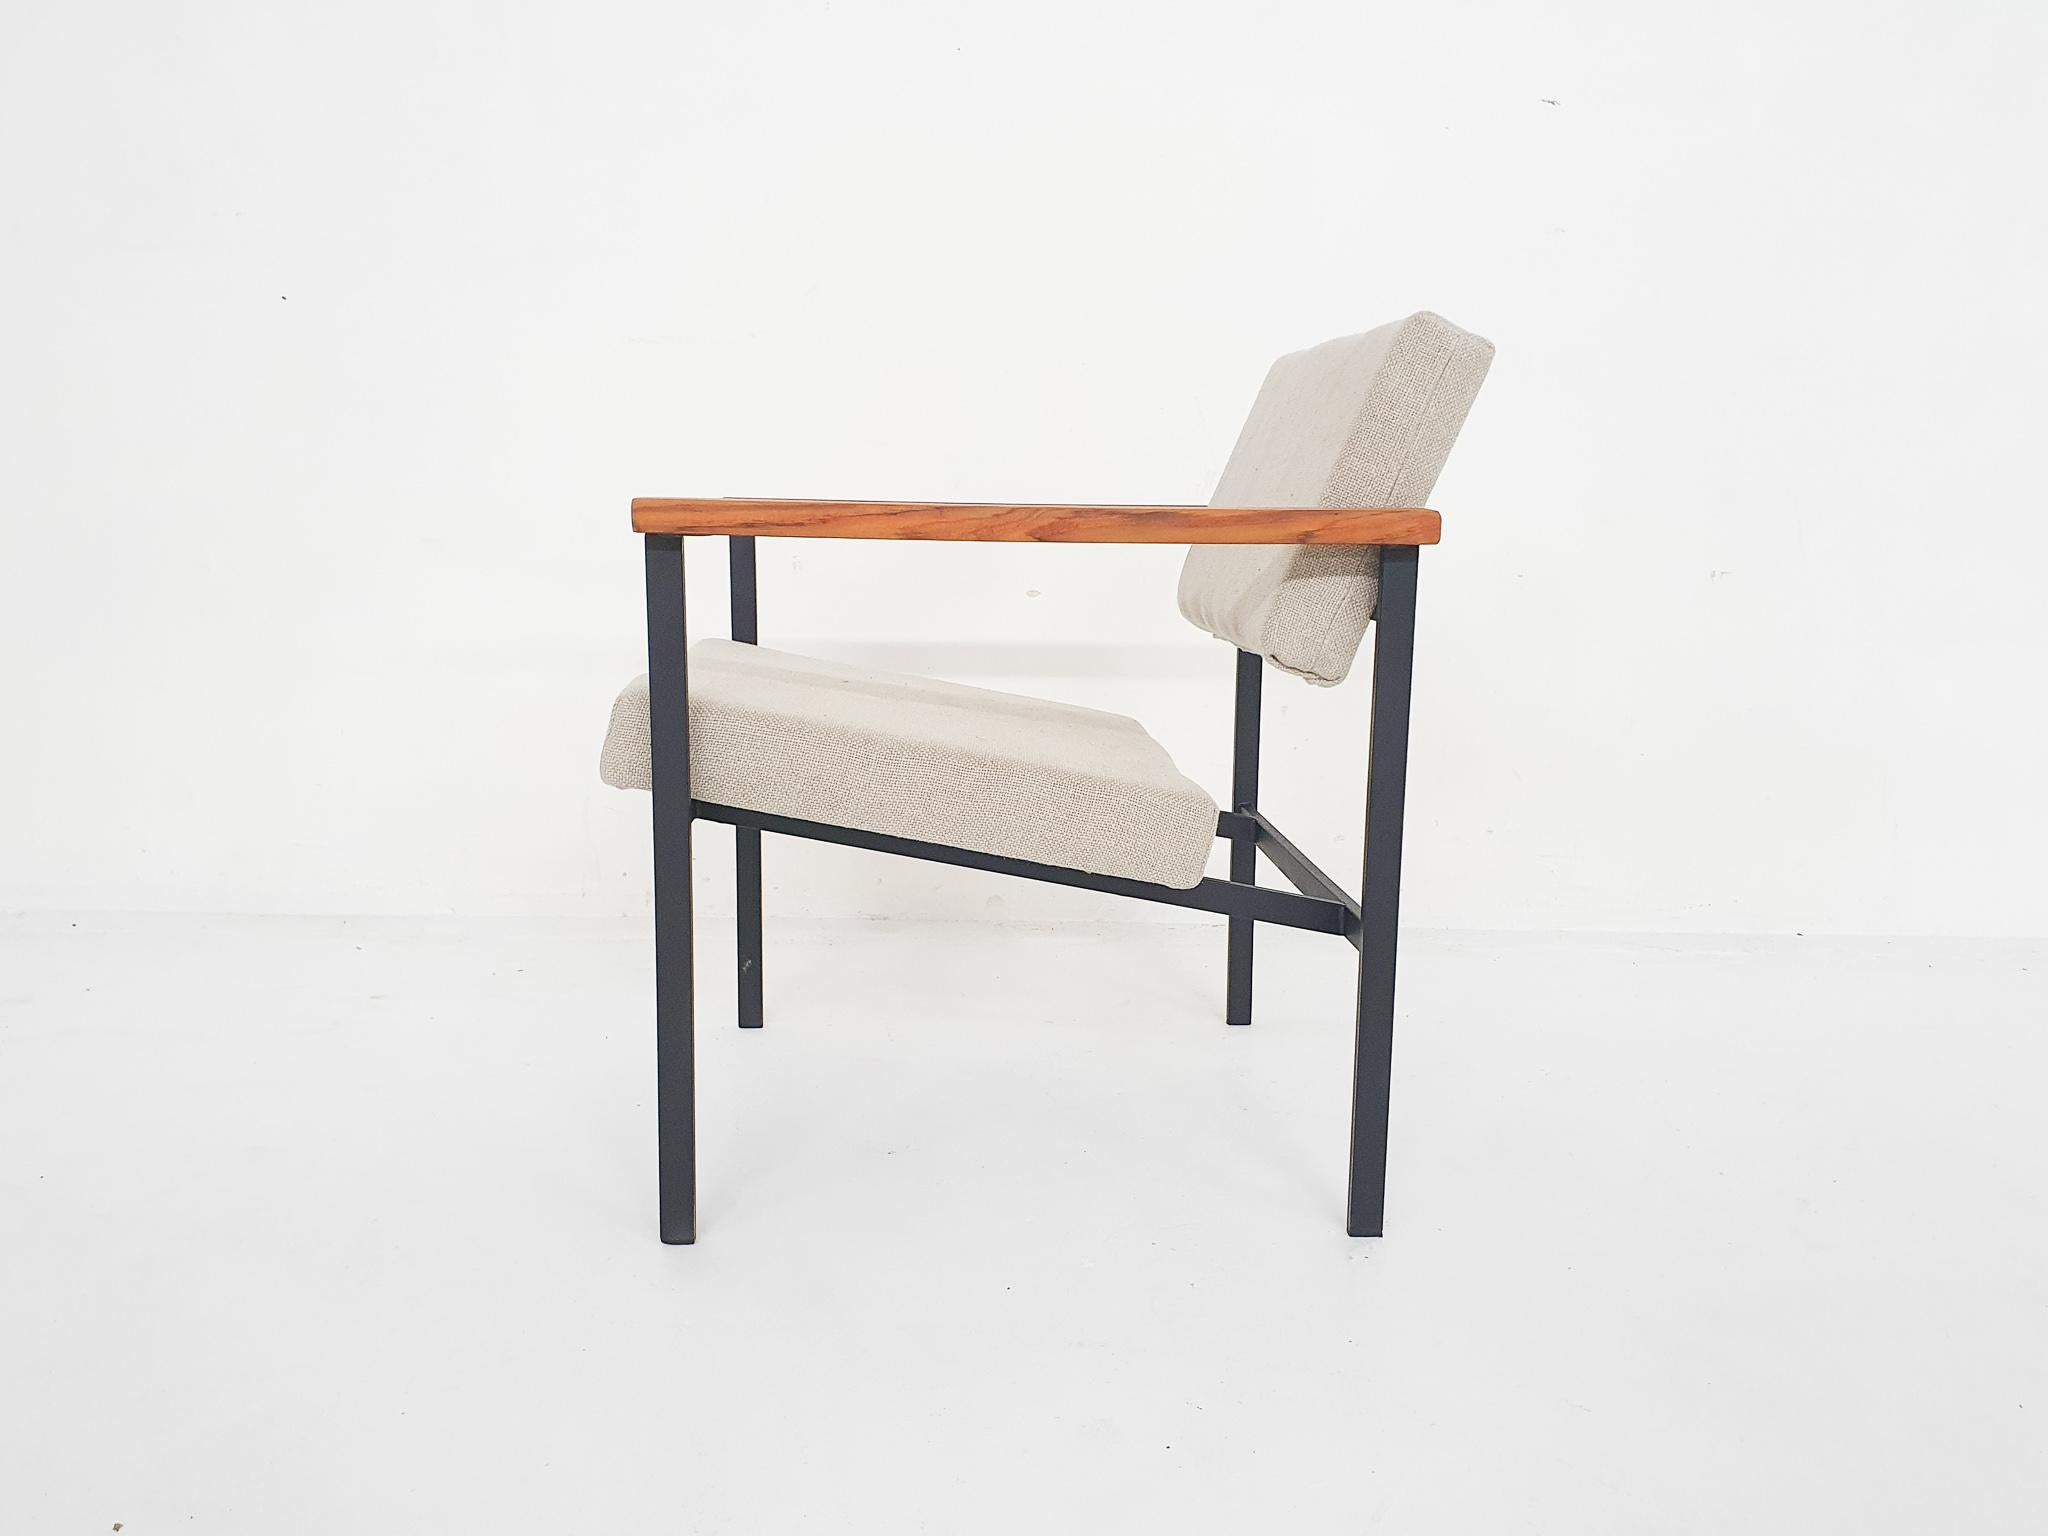 Dutch Minimalistic lounge chair by Marko, The Netherlands, 1960's